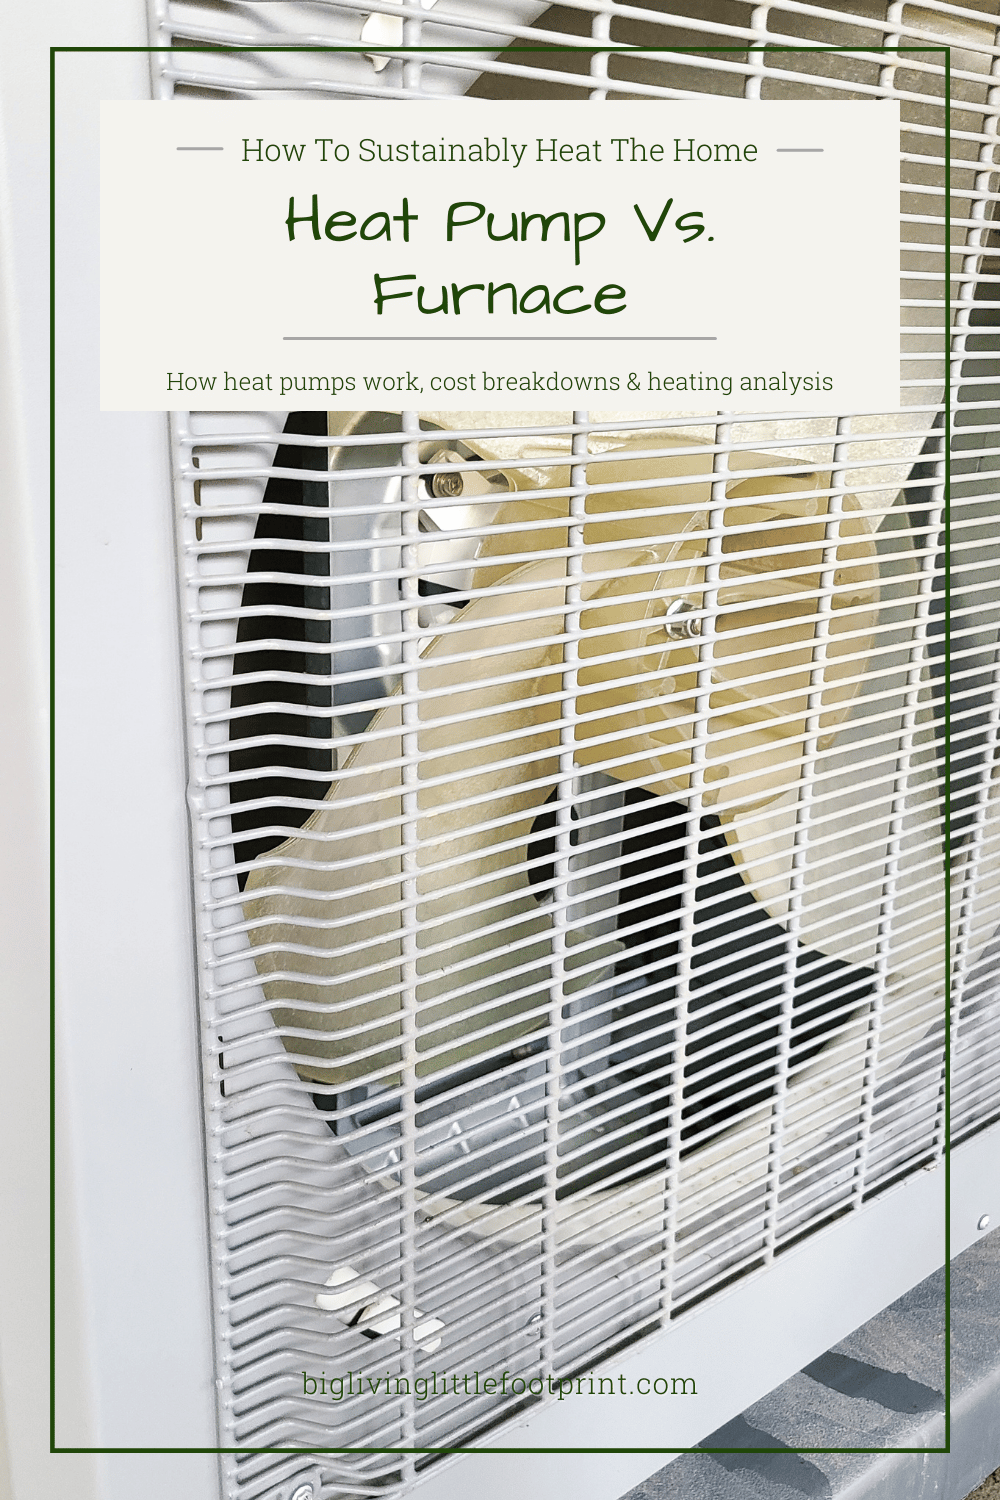 How To Sustainably Heat The Home – Heat Pump vs Furnace